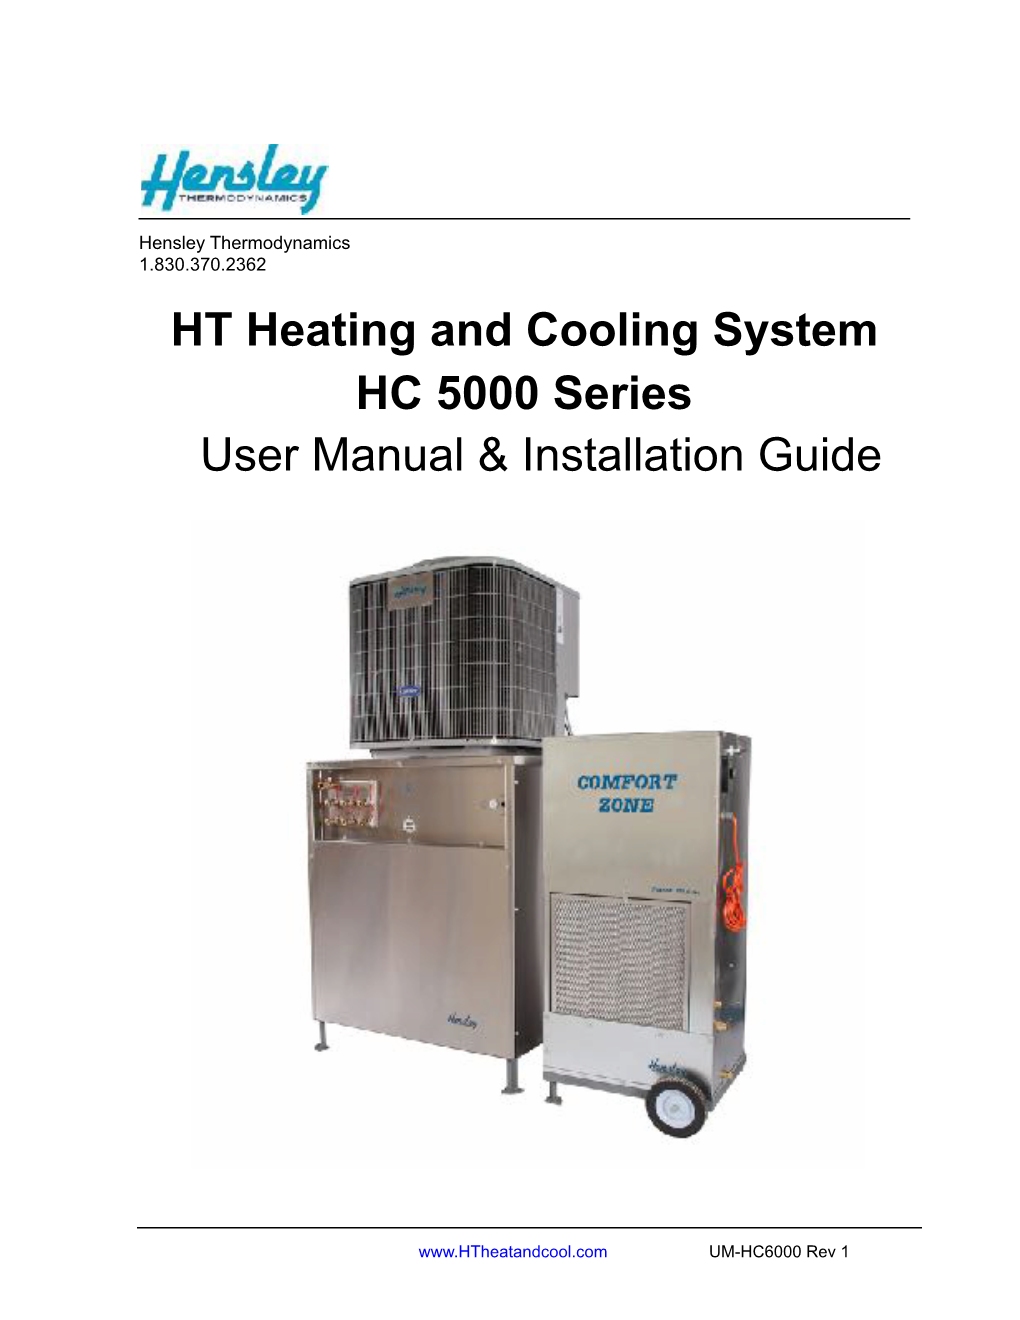 HT Heating and Cooling System HC 5000 Series User Manual & Installation Guide